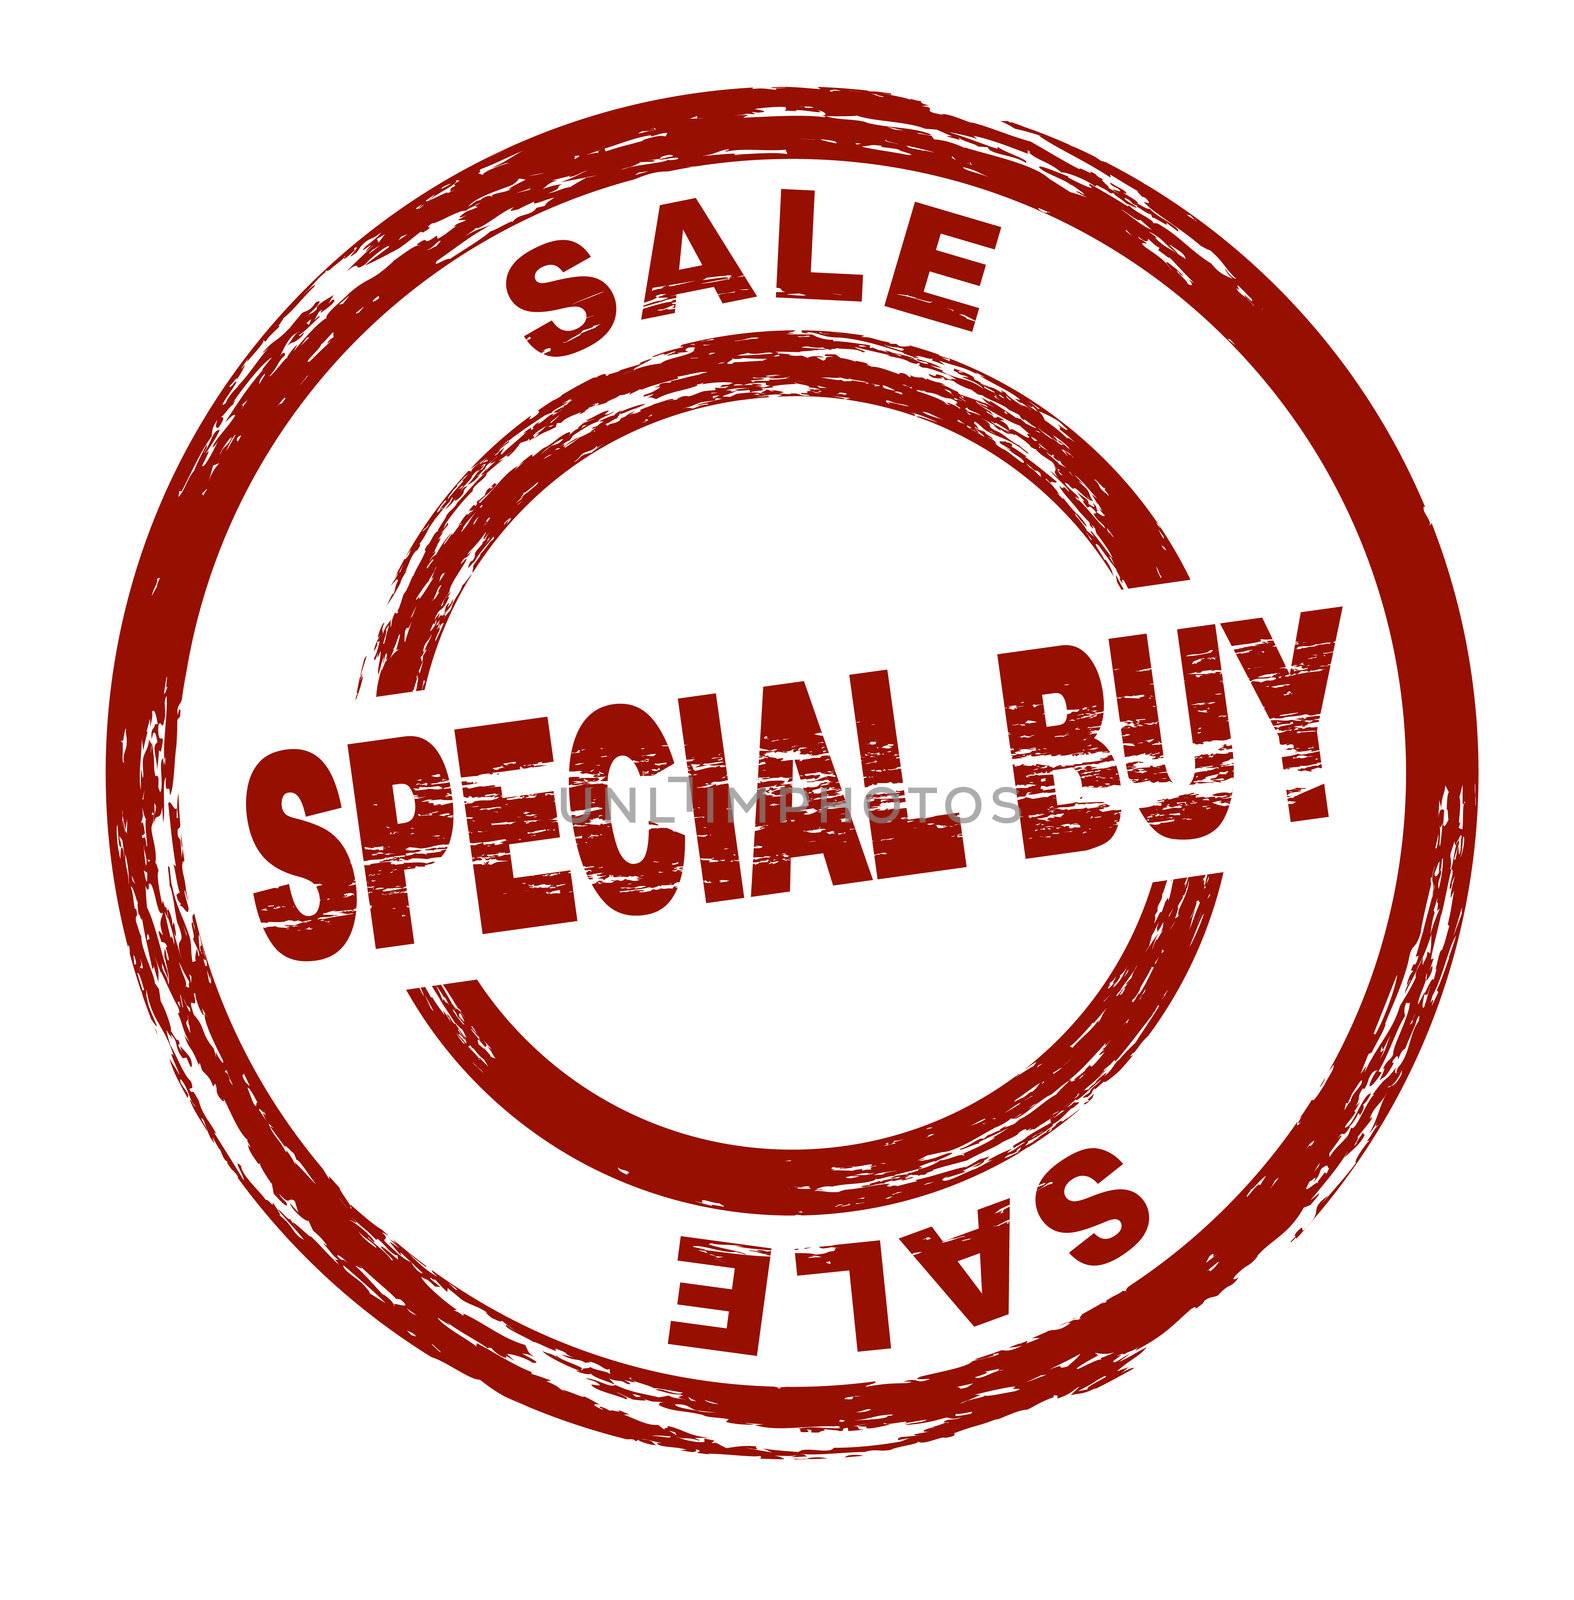 A stylized red stamp shows the term sale special buy. All on white background.